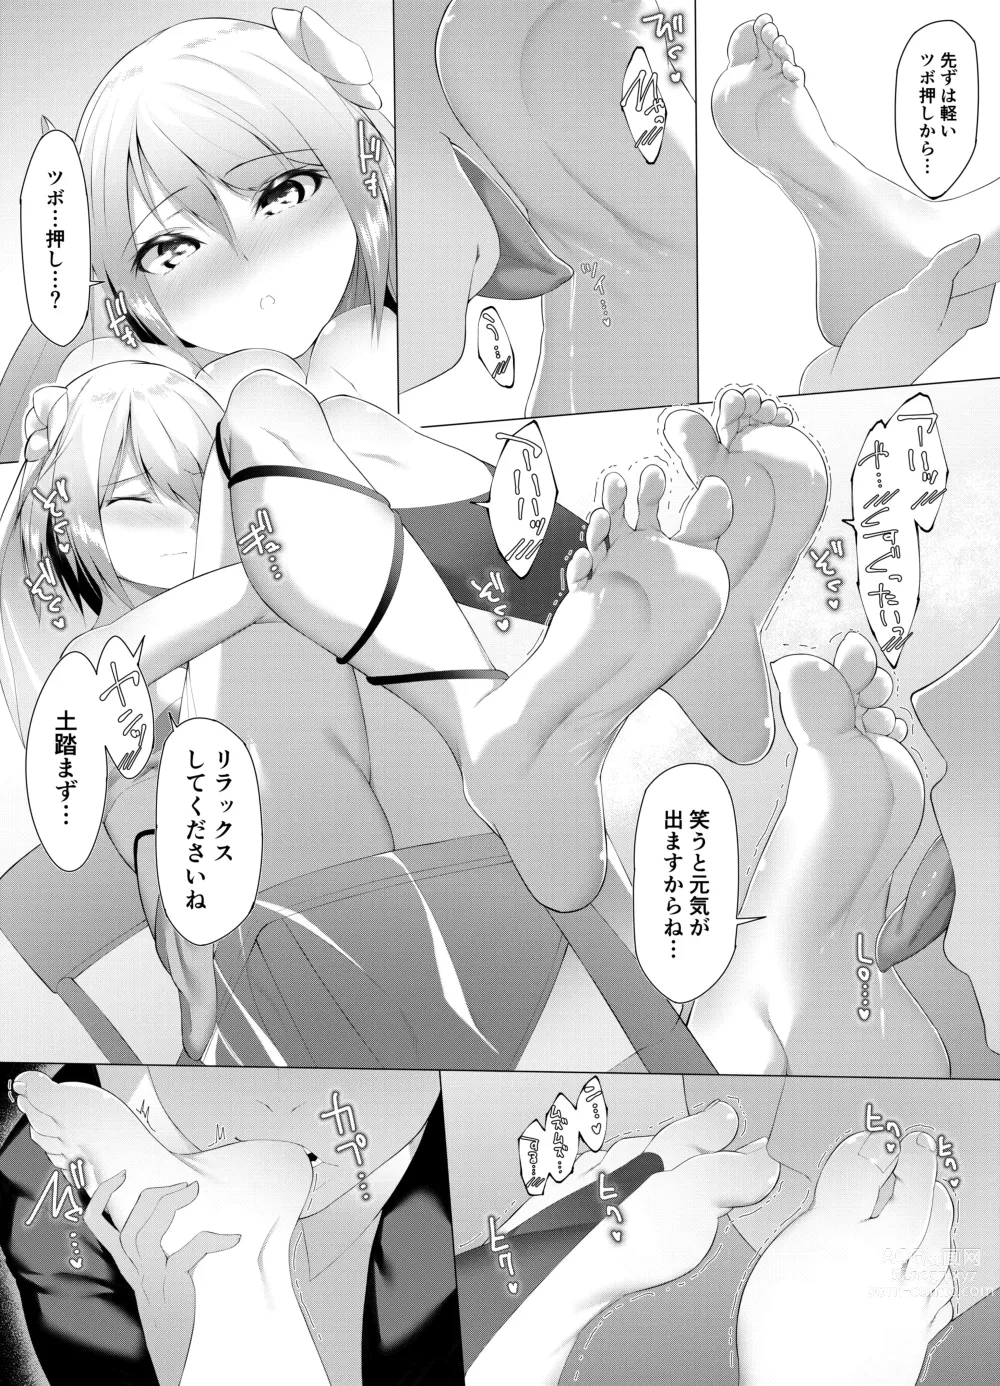 Page 3 of doujinshi 踊り子の秘密